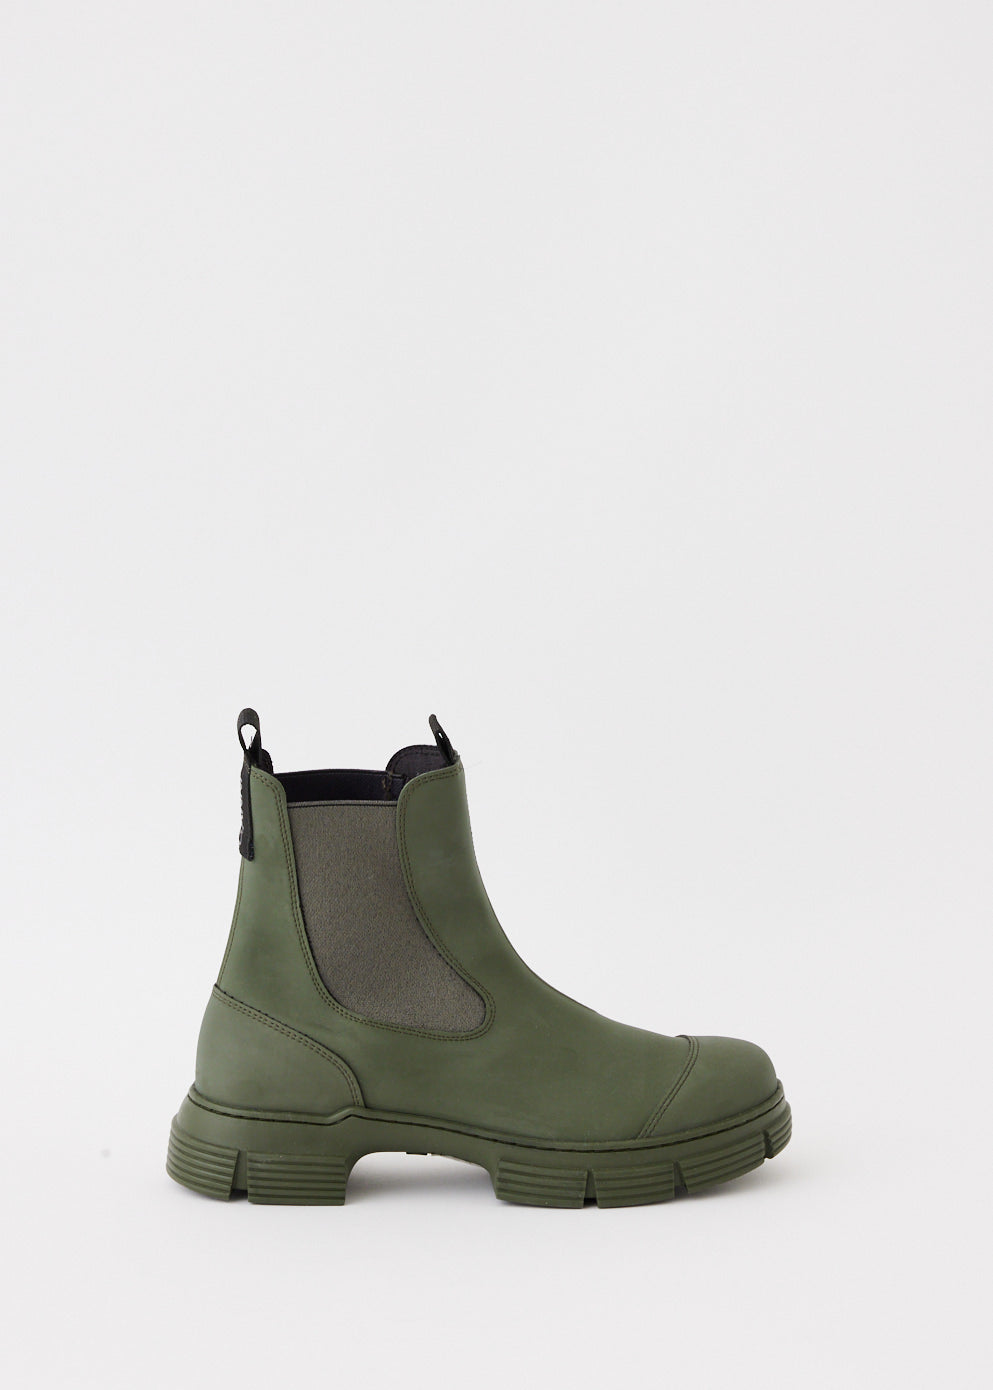 Recycled Rubber Boots